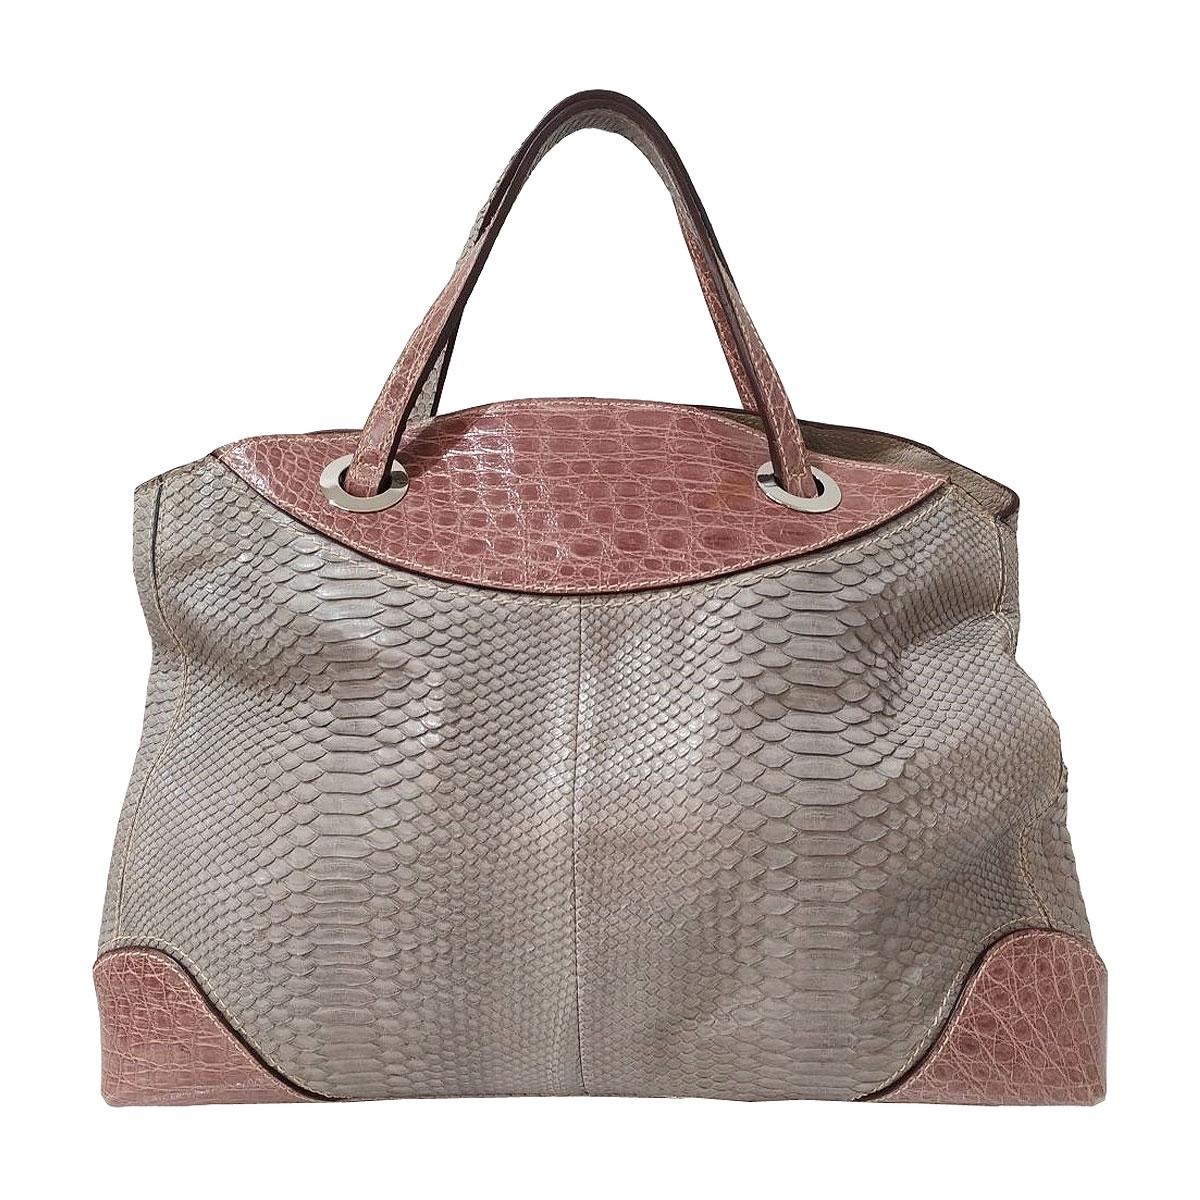 Amazing italian artisanal bag
Real python
Grey color
Real crocodile, in pink shade
Two handles
Double internal compartment, divided by large zip pocket
Red innternal leather
Two internal pockets (one with zip ) and phone holder
Cm 46 x 33 x 13